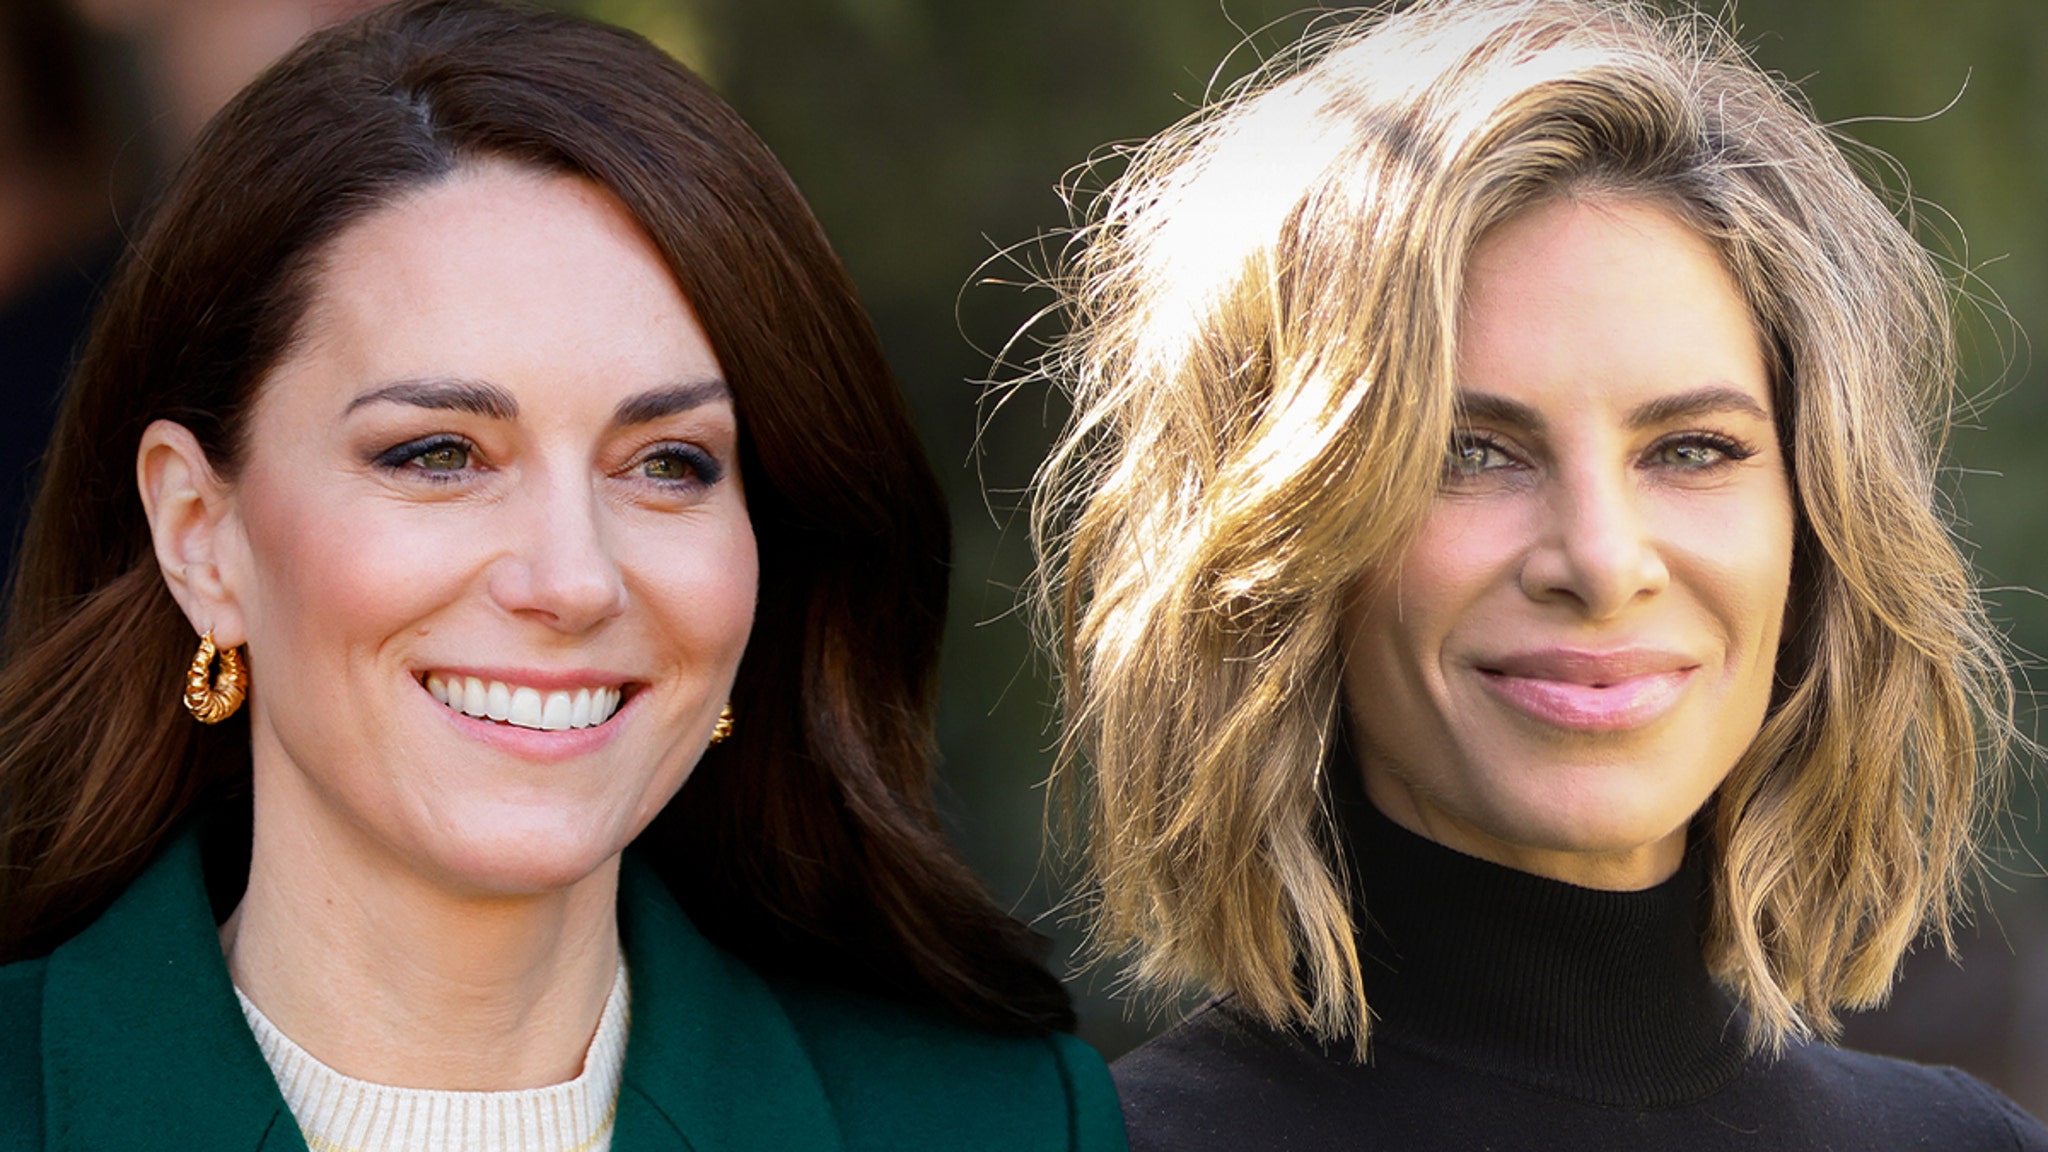 Jillian Michaels Says Kate Middleton Doesn’t Look Too Thin in New Video